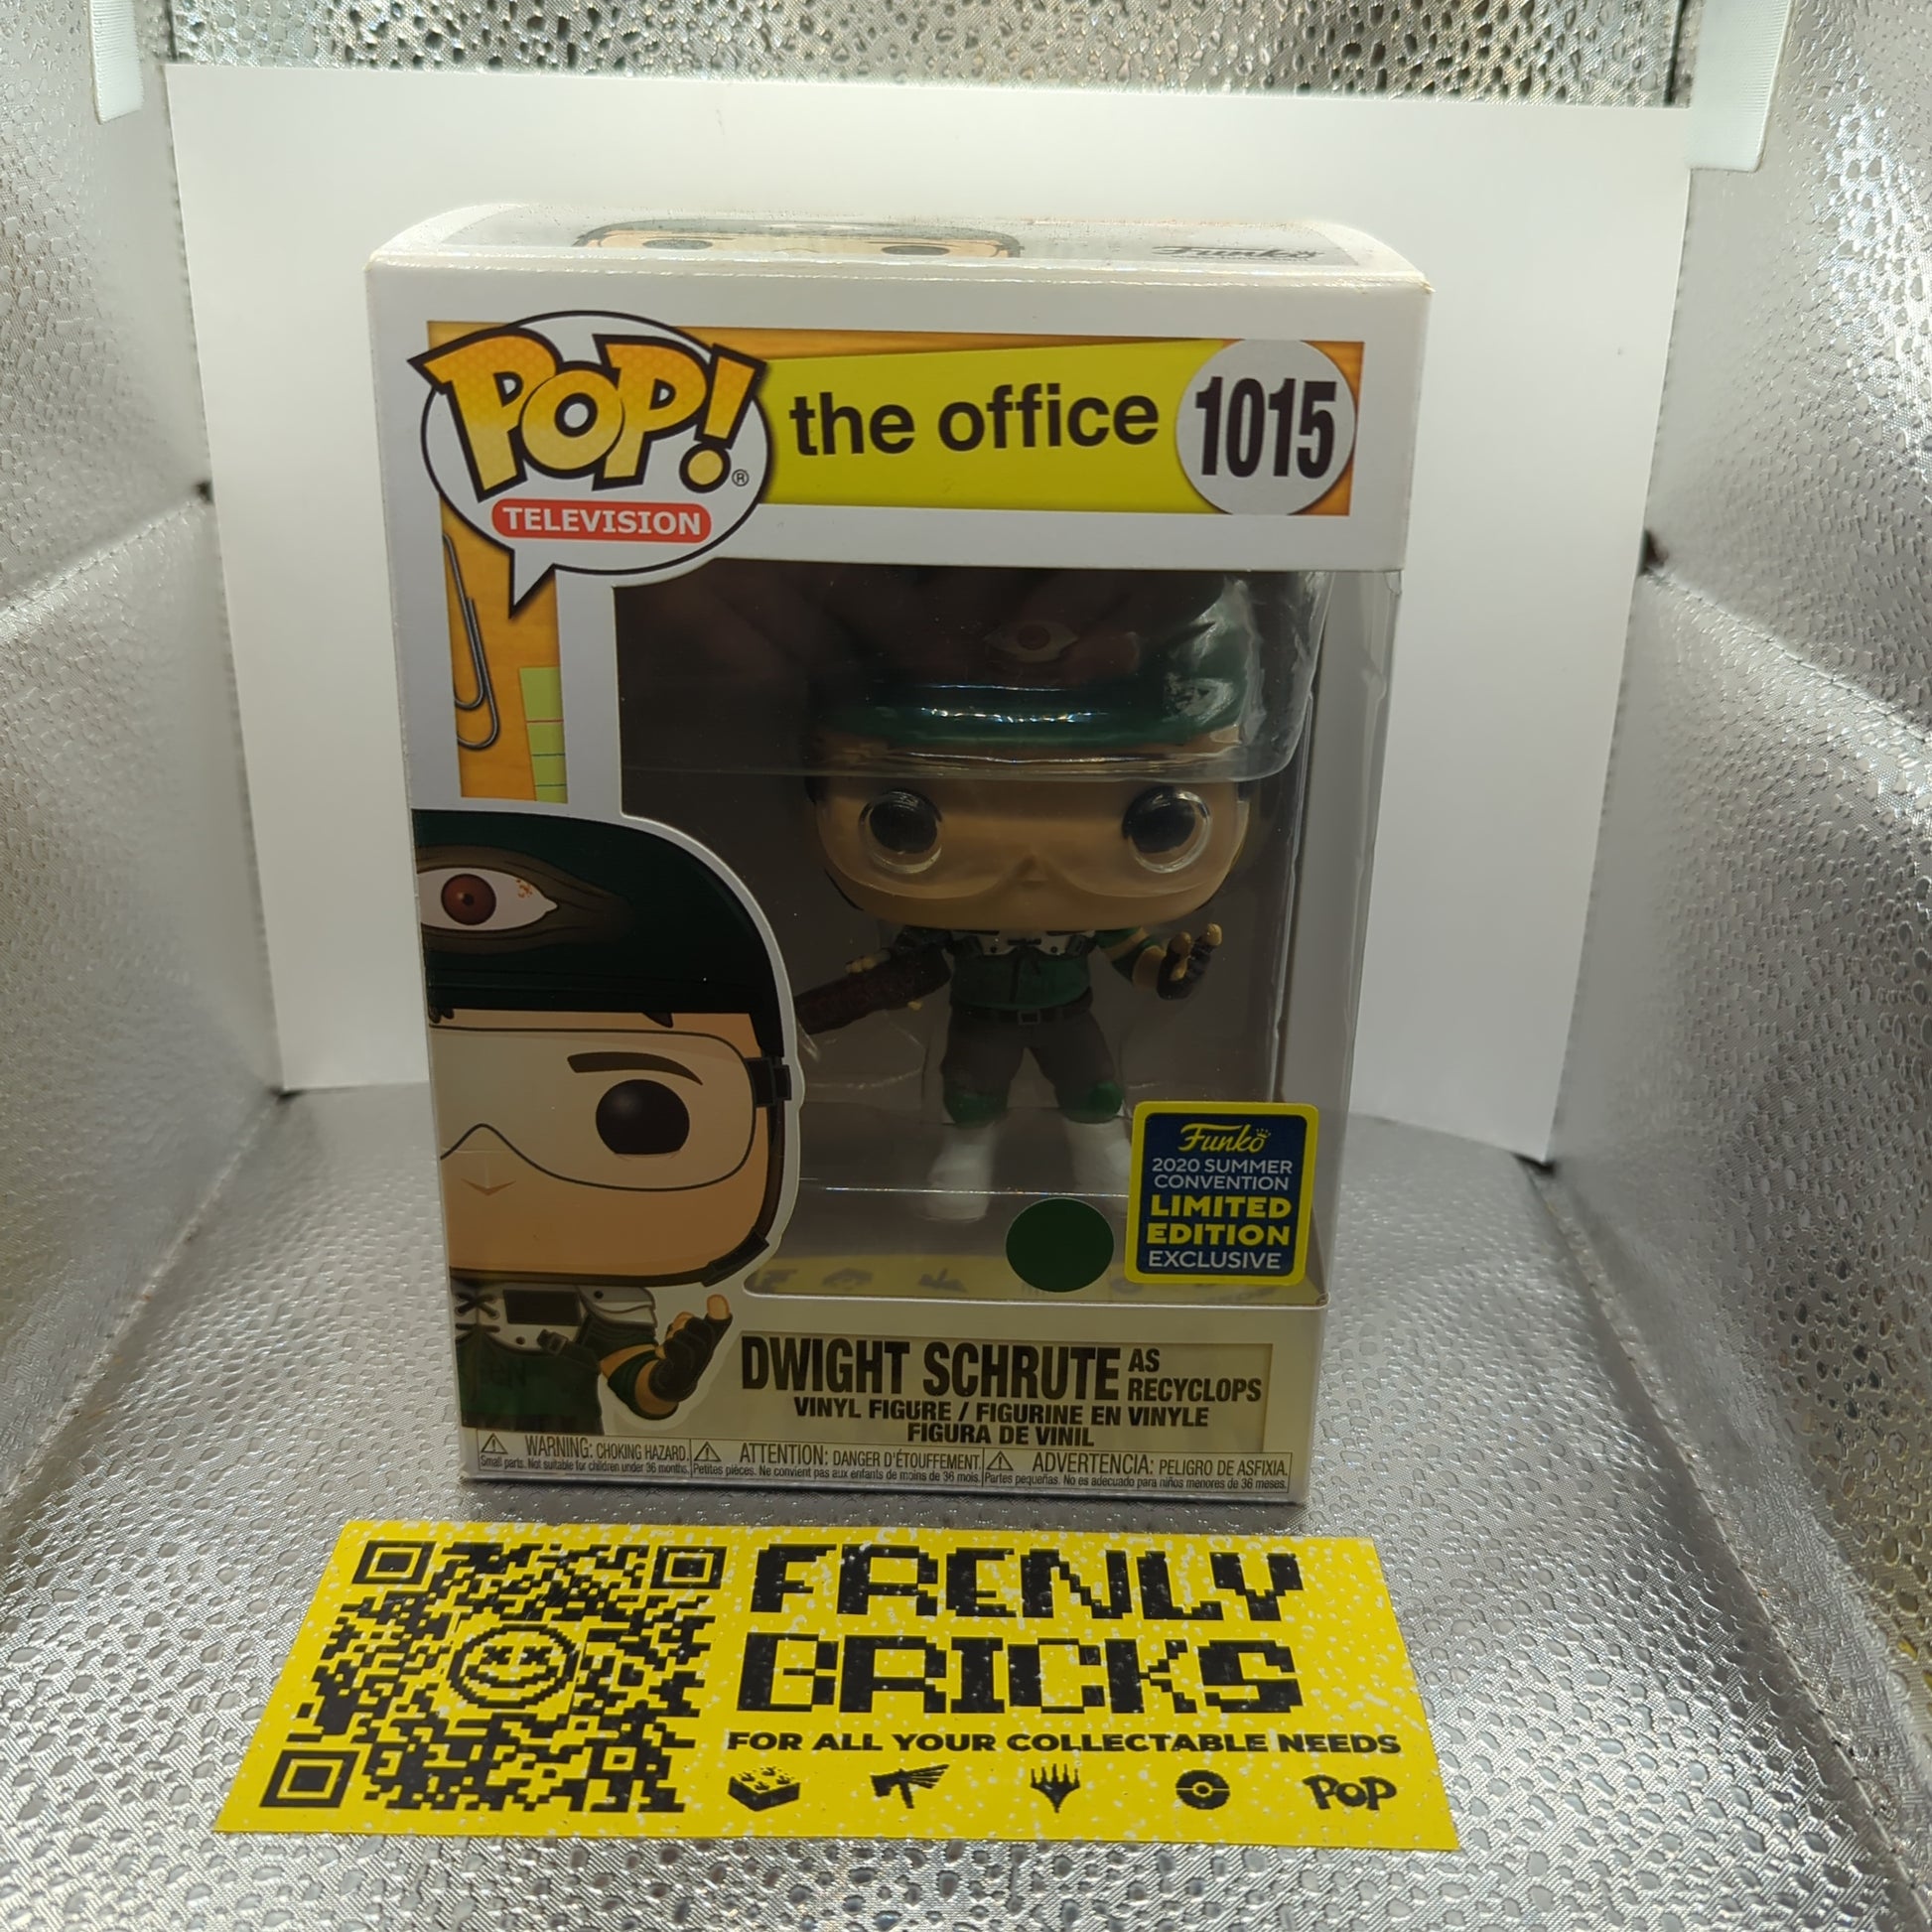 Television Funko Pop - Dwight Schrute as Recyclops - The Office - SDCC -No. 1015 FRENLY BRICKS - Open 7 Days